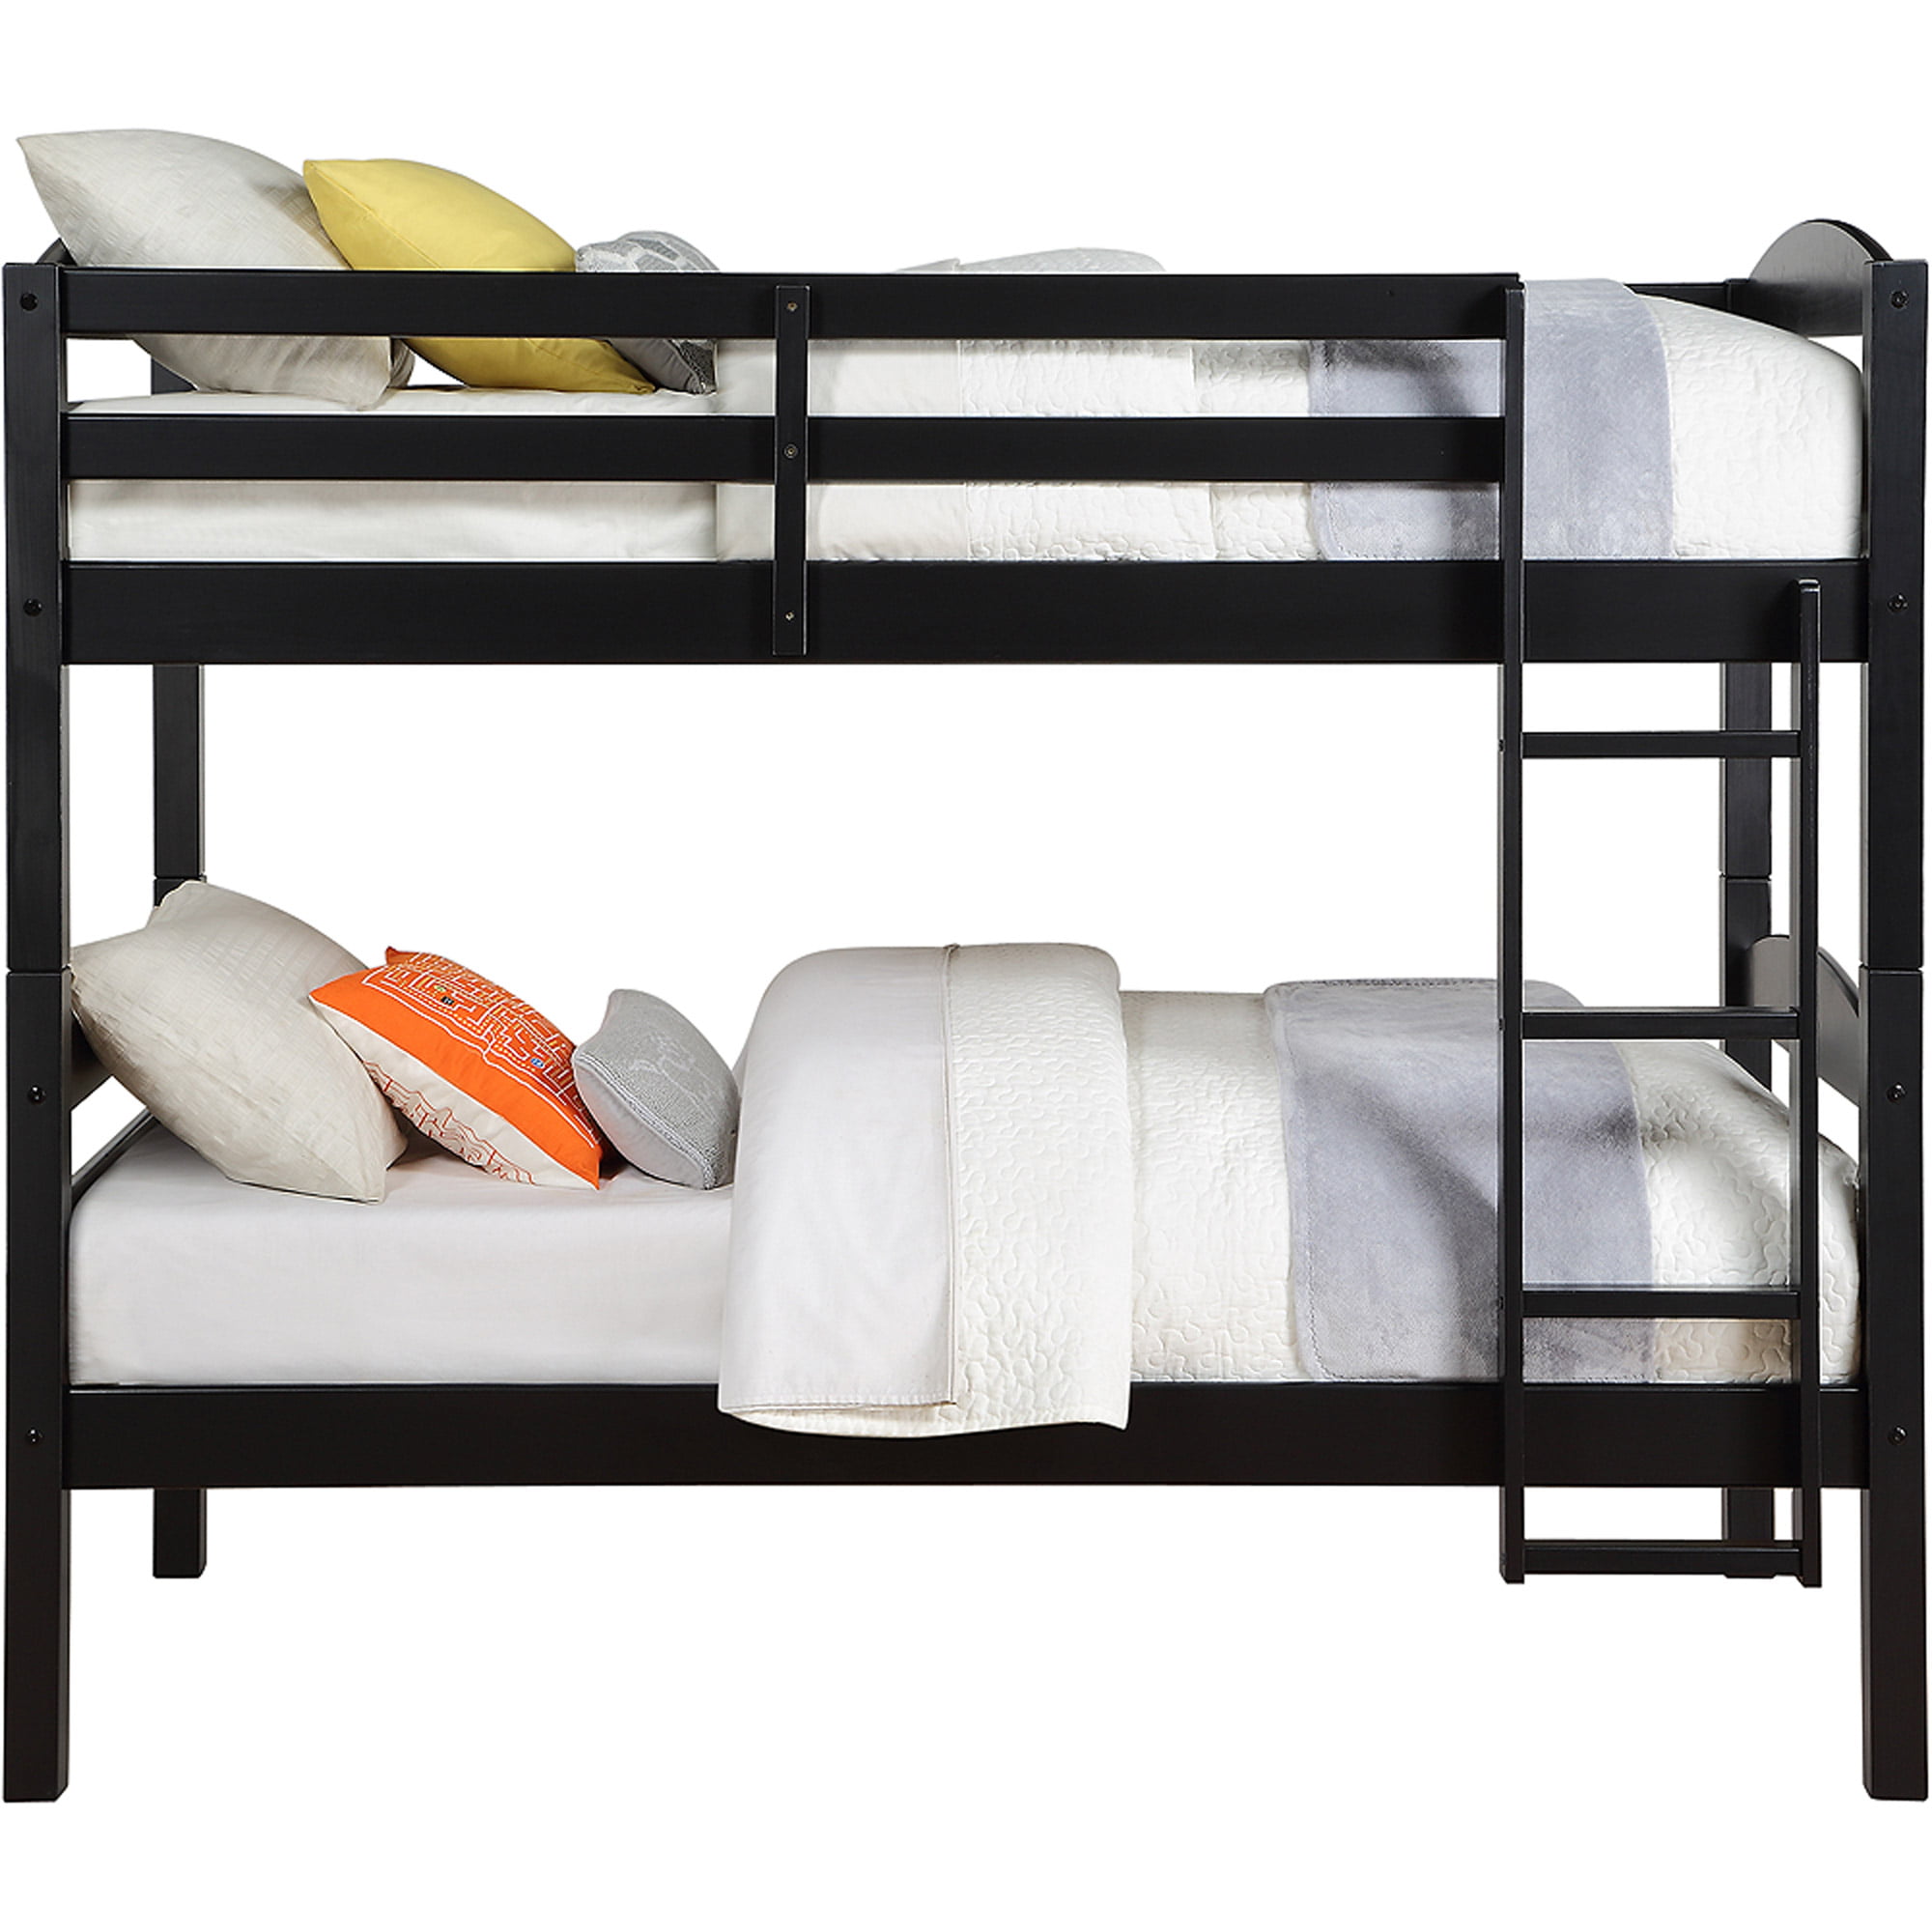 better homes and gardens leighton twin over twin wood bunk bed